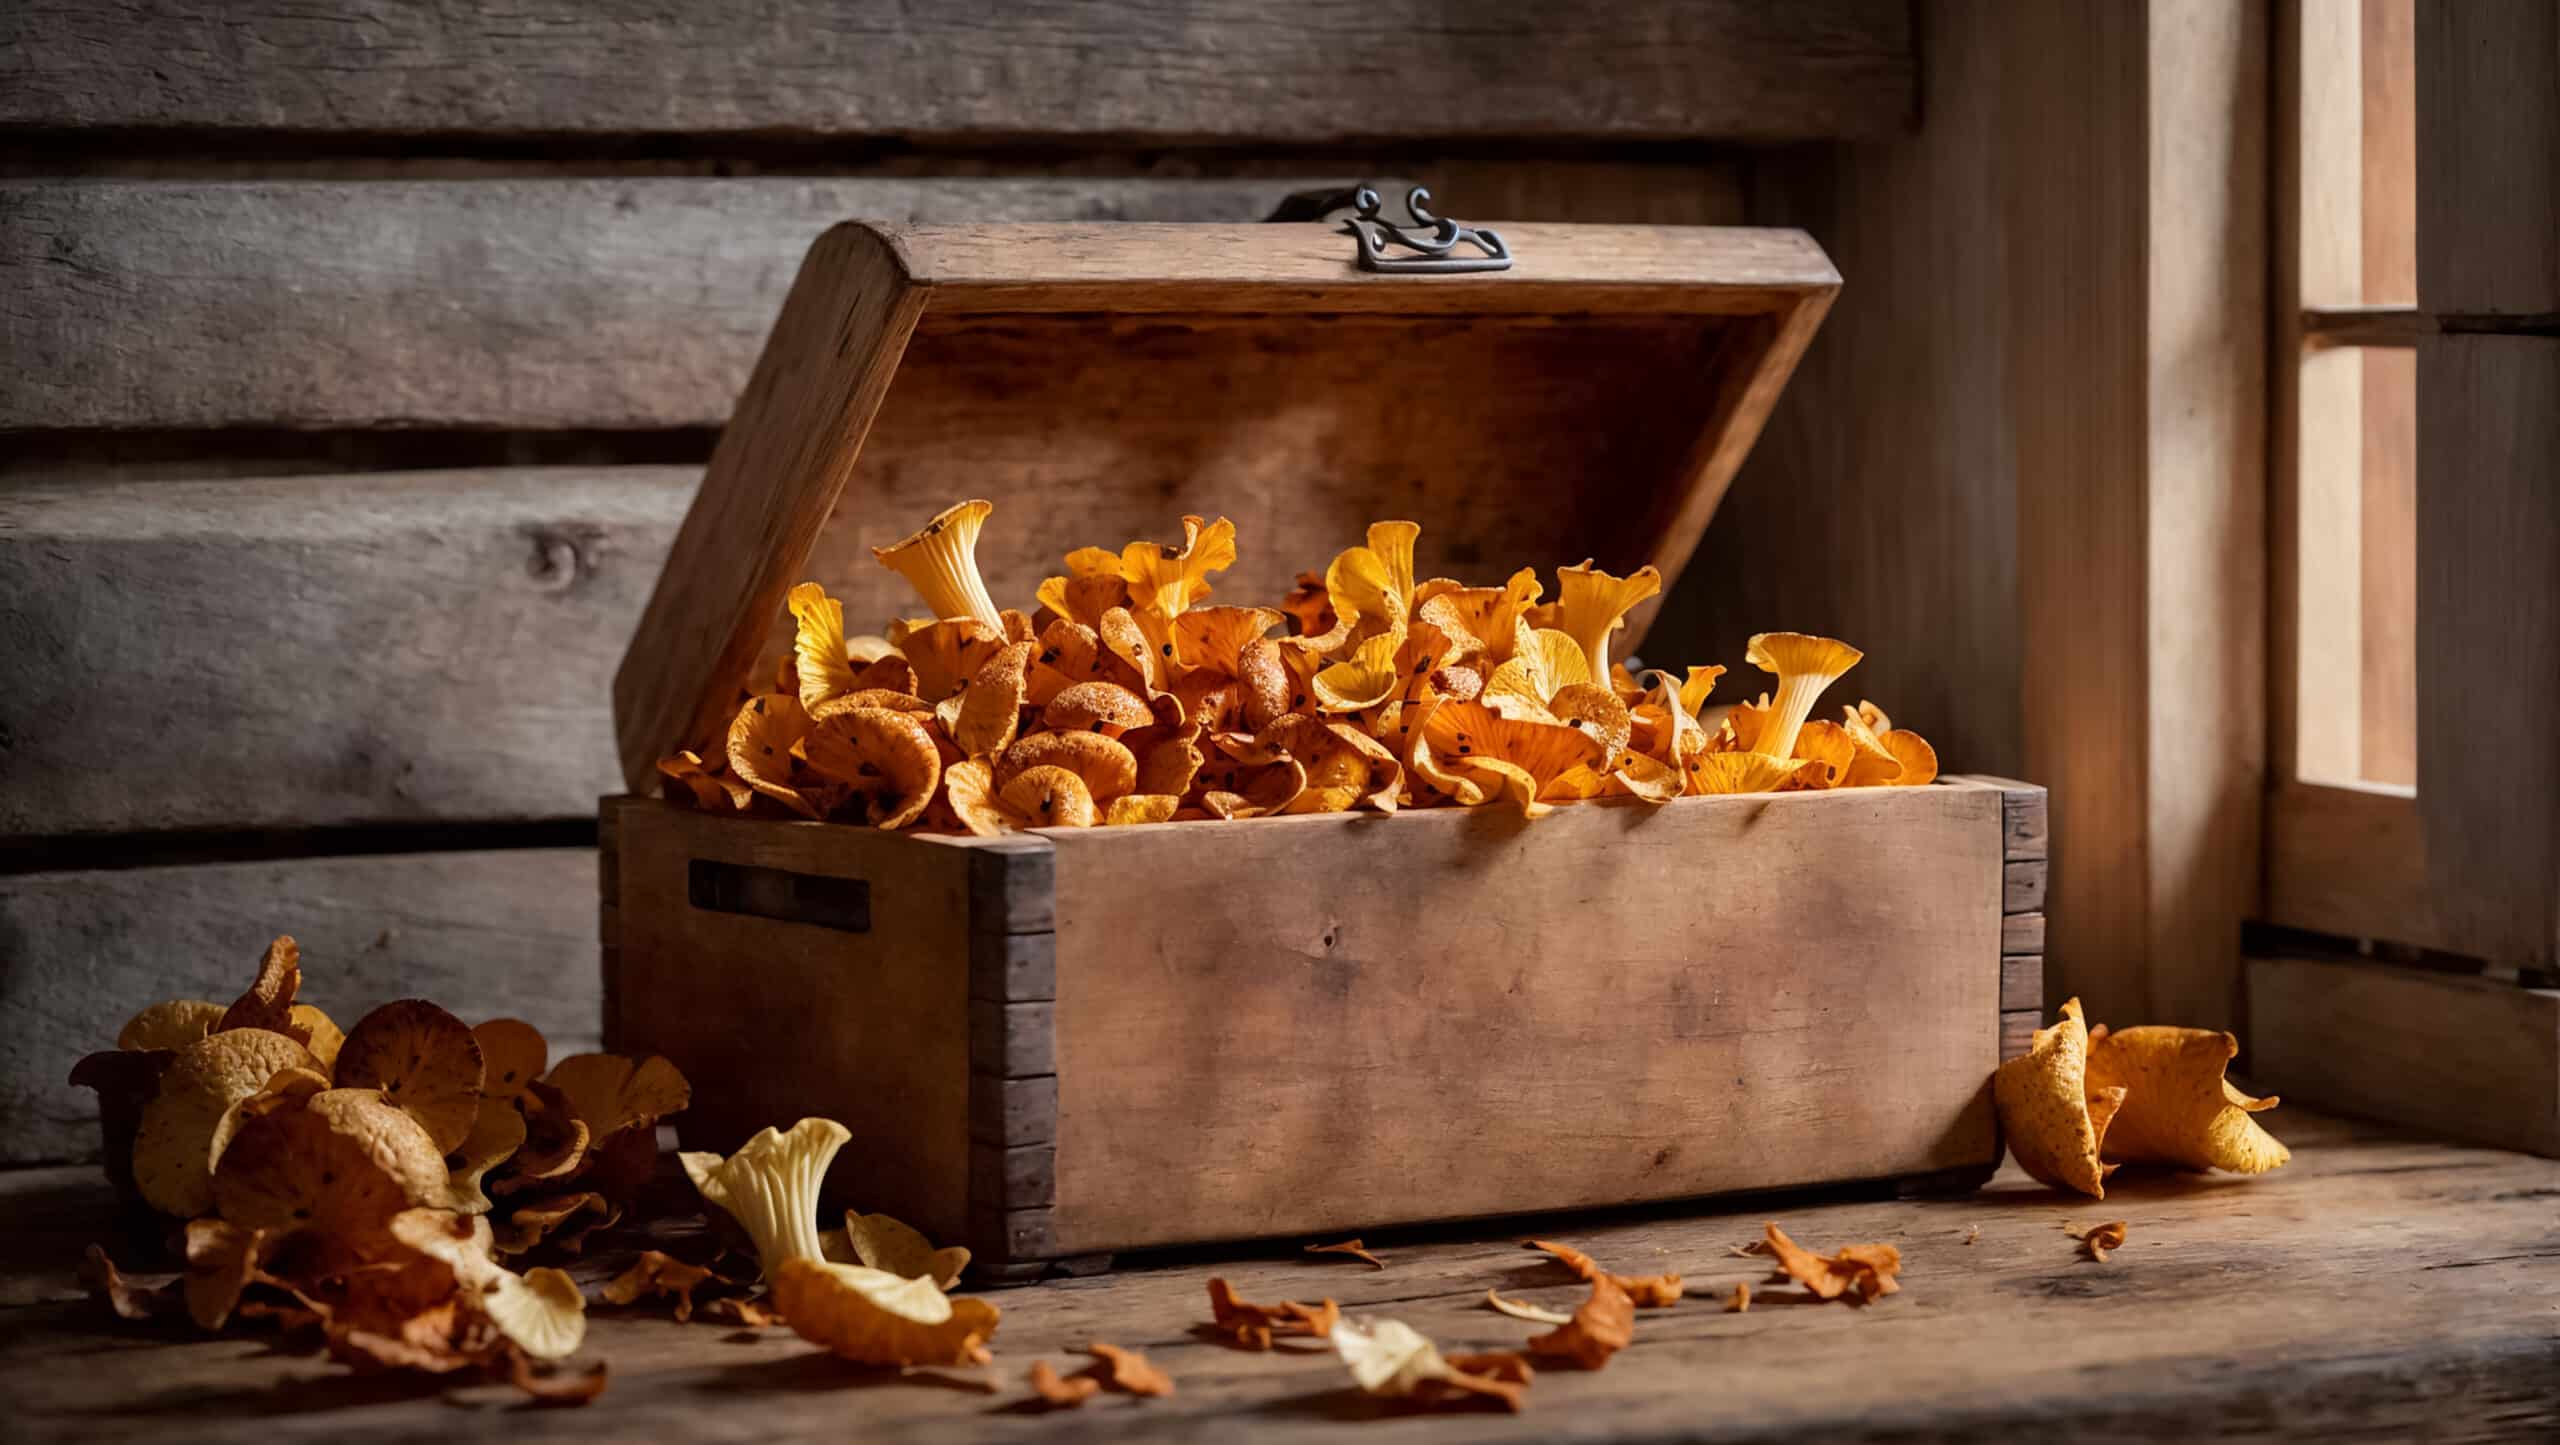 growmyownhealthfood.com : What are the side effects of chicken of the woods?